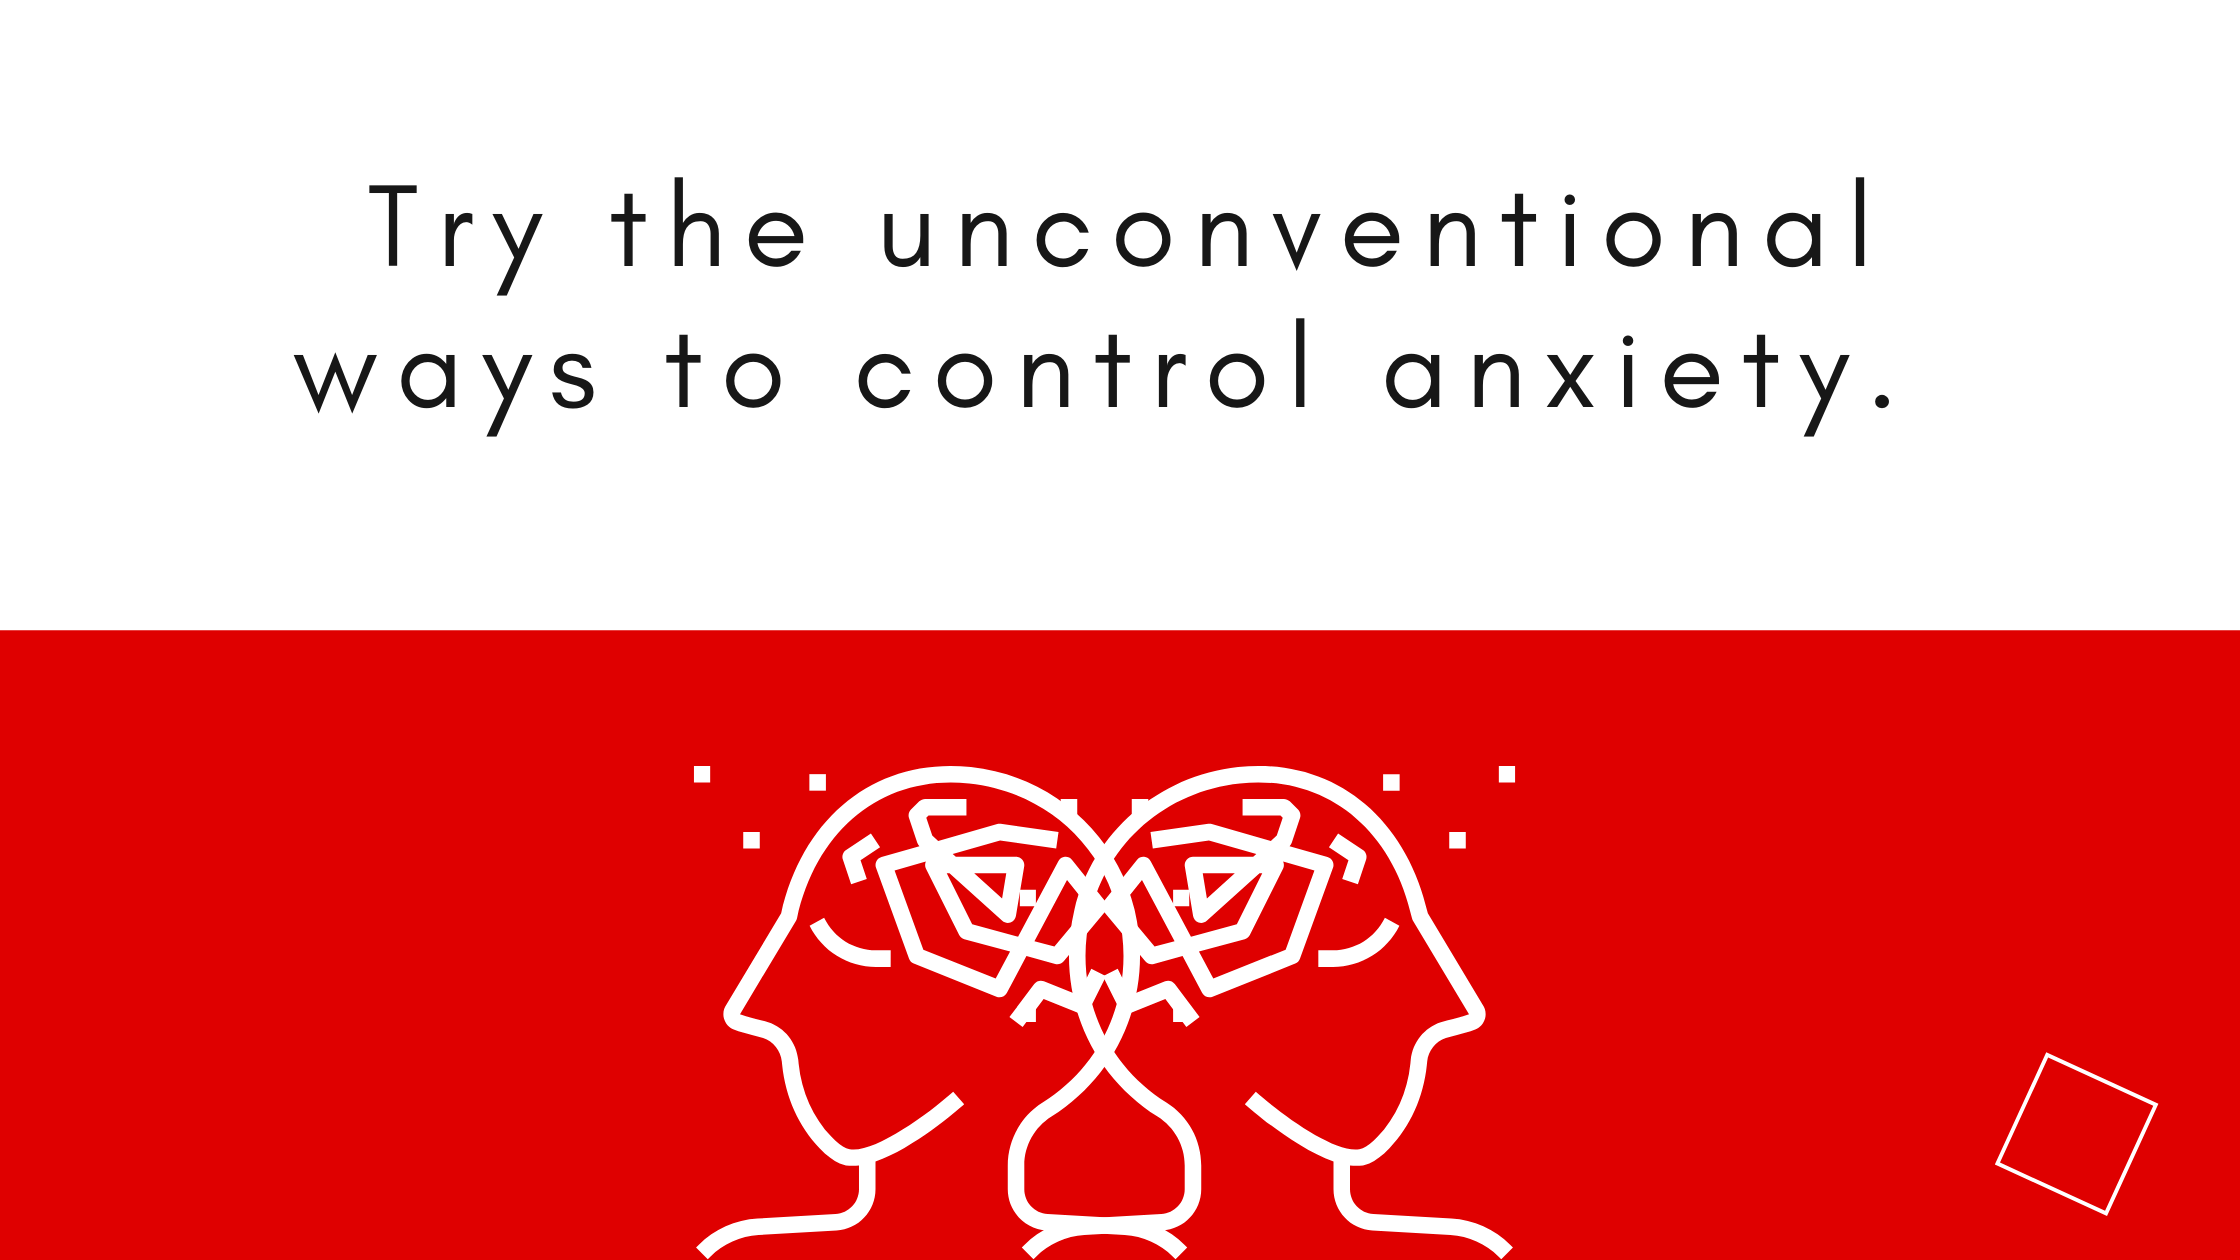 how to get rid of anxiety